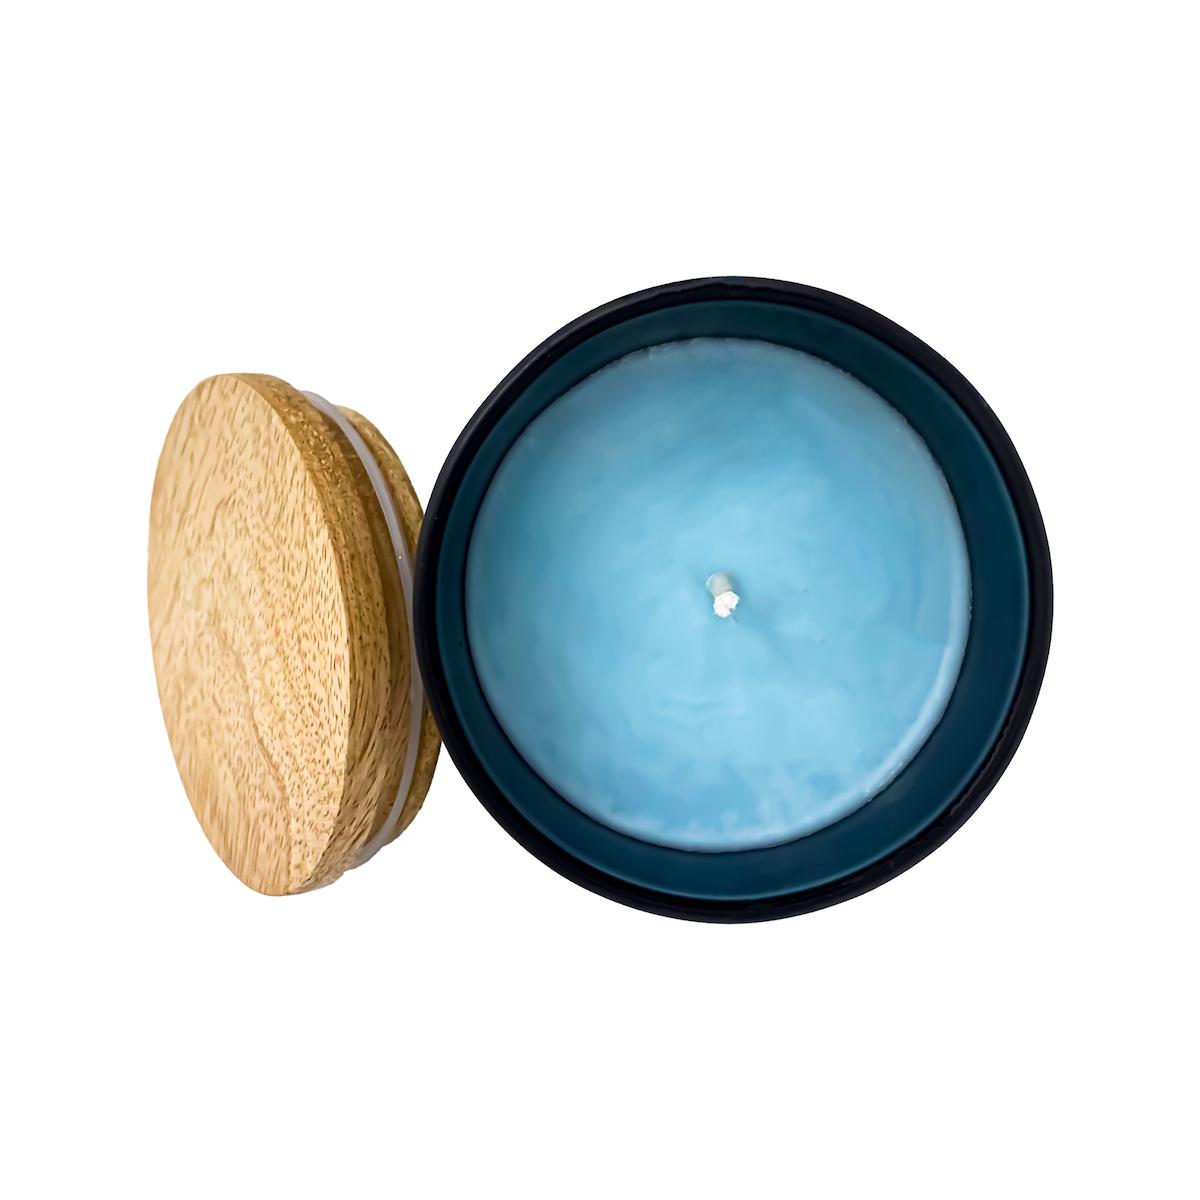 Soy Wax Ocean Breeze Scented Candle